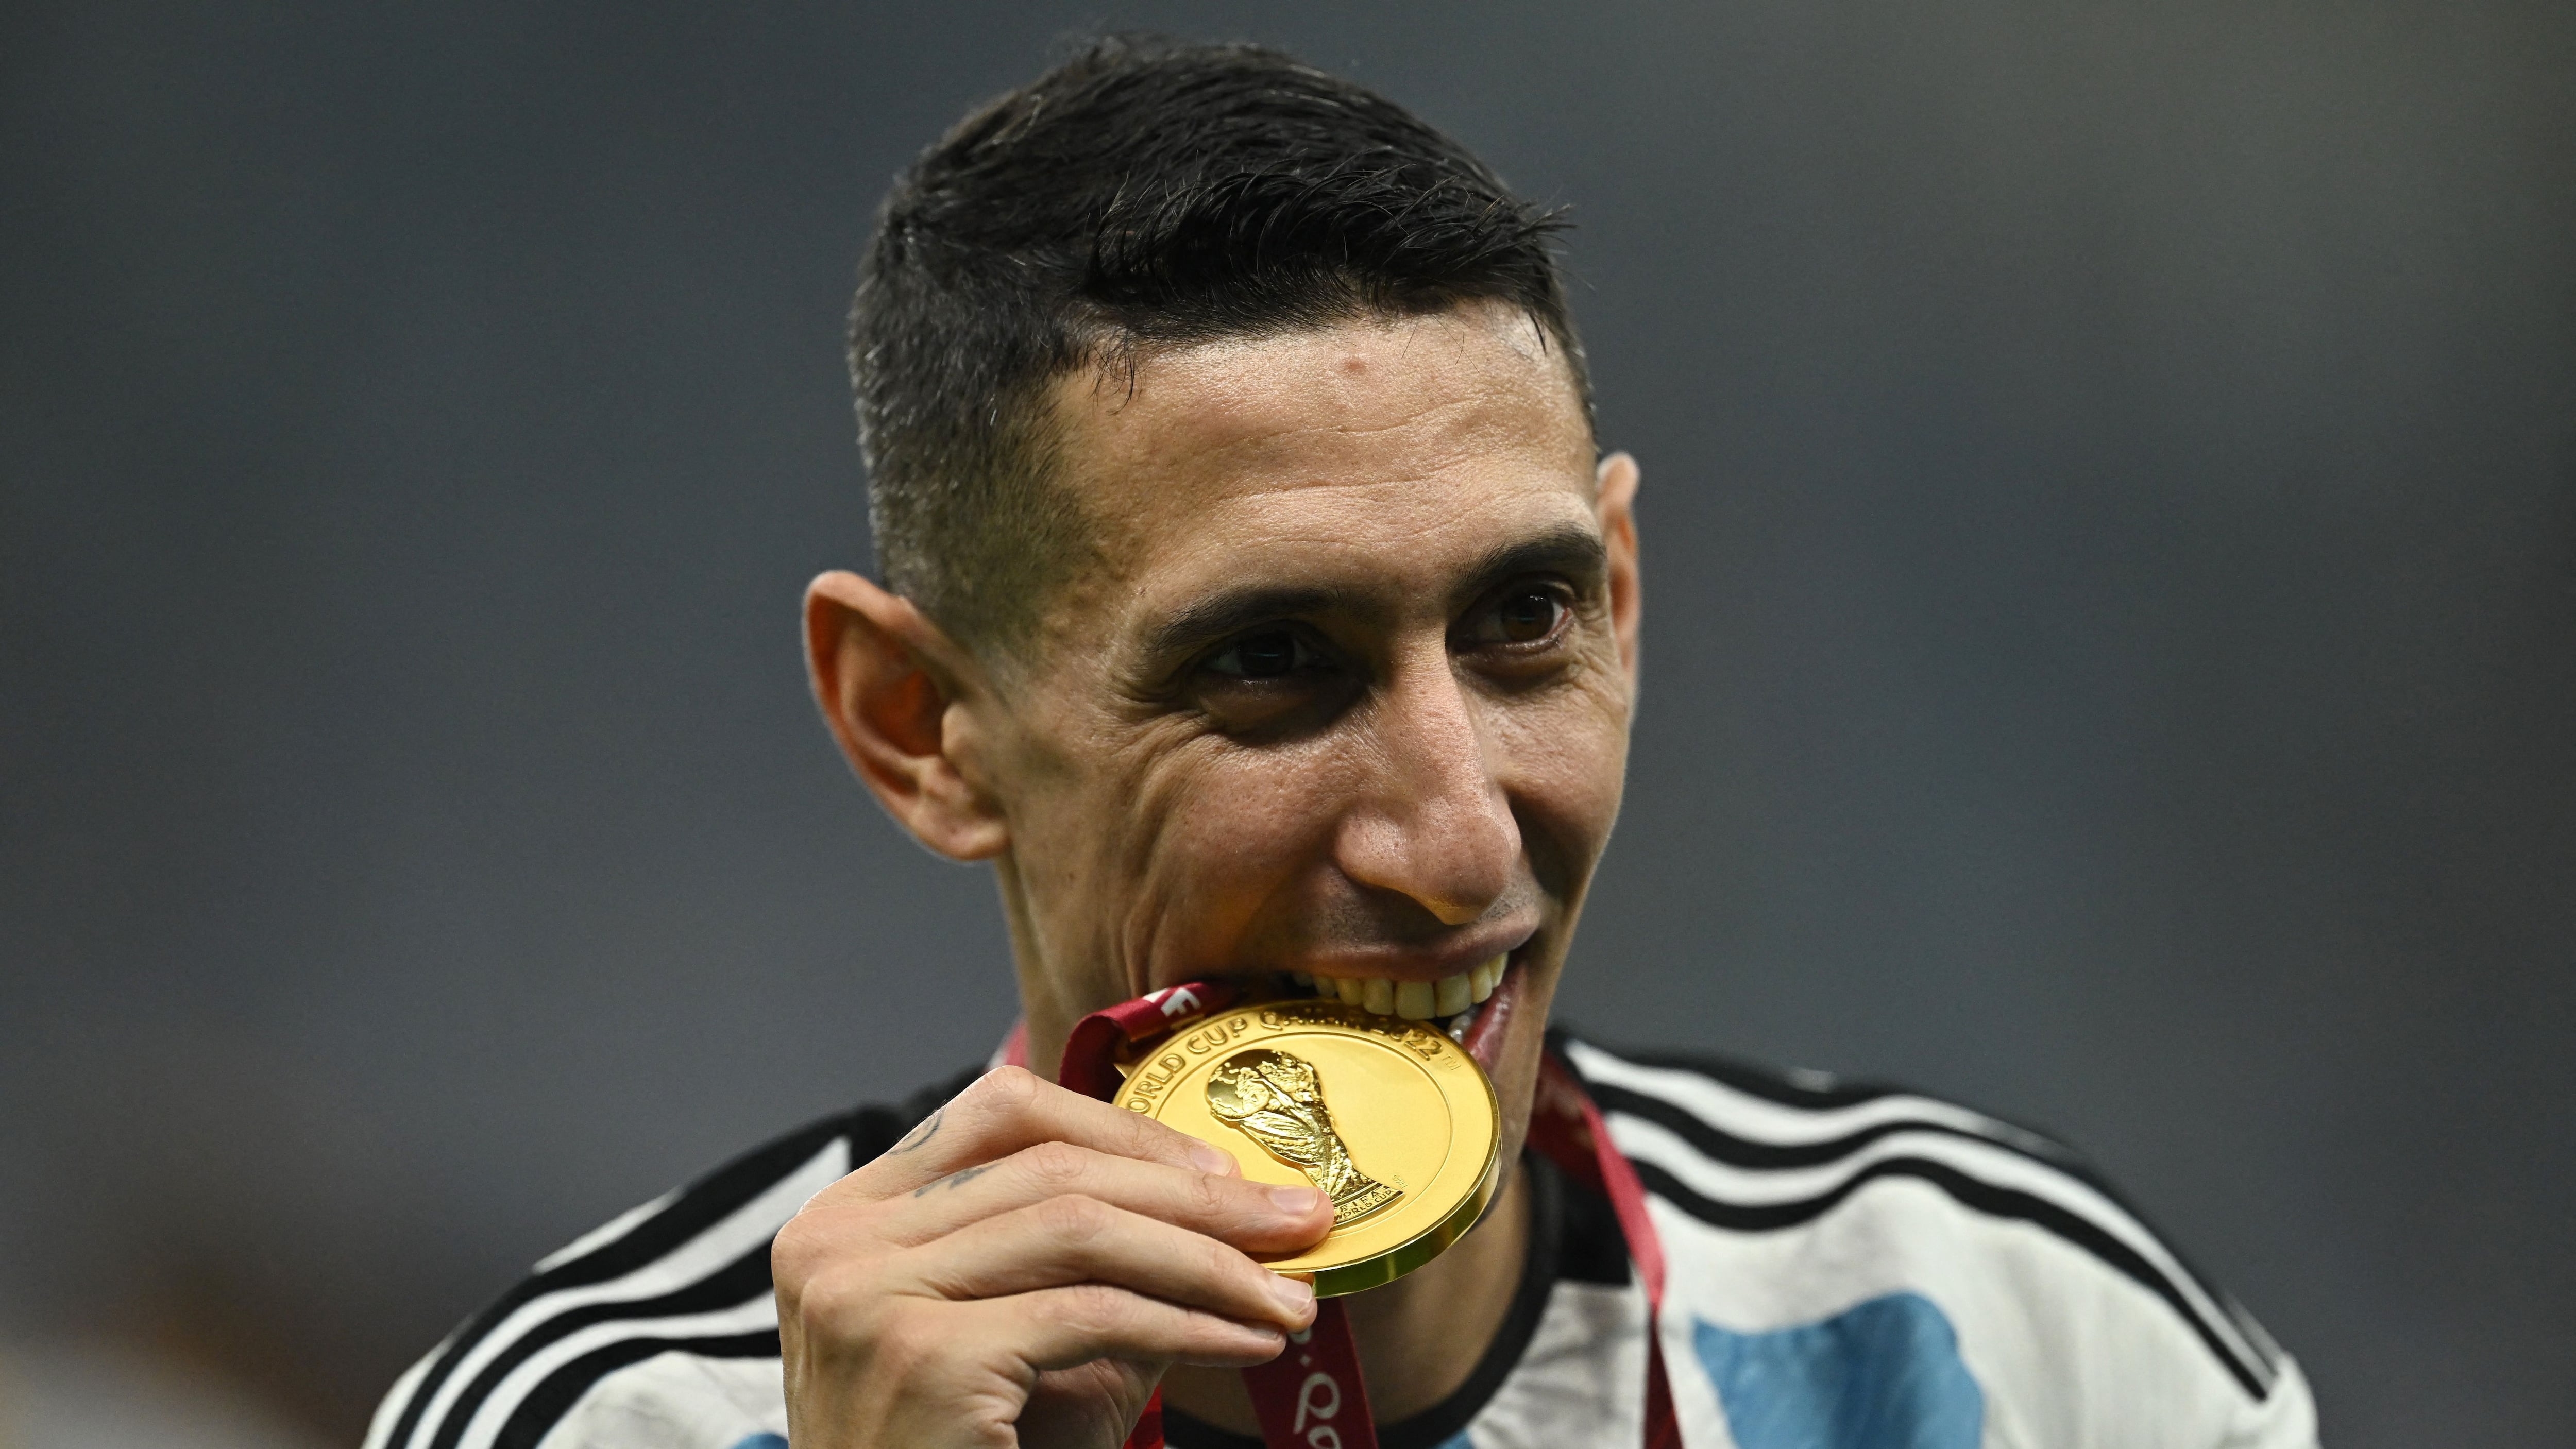 Soccer Football - FIFA World Cup Qatar 2022 - Final - Argentina v France - Lusail Stadium, Lusail, Qatar - December 18, 2022  Argentina's Angel Di Maria celebrates with a medal after winning the World Cup REUTERS/Dylan Martinez